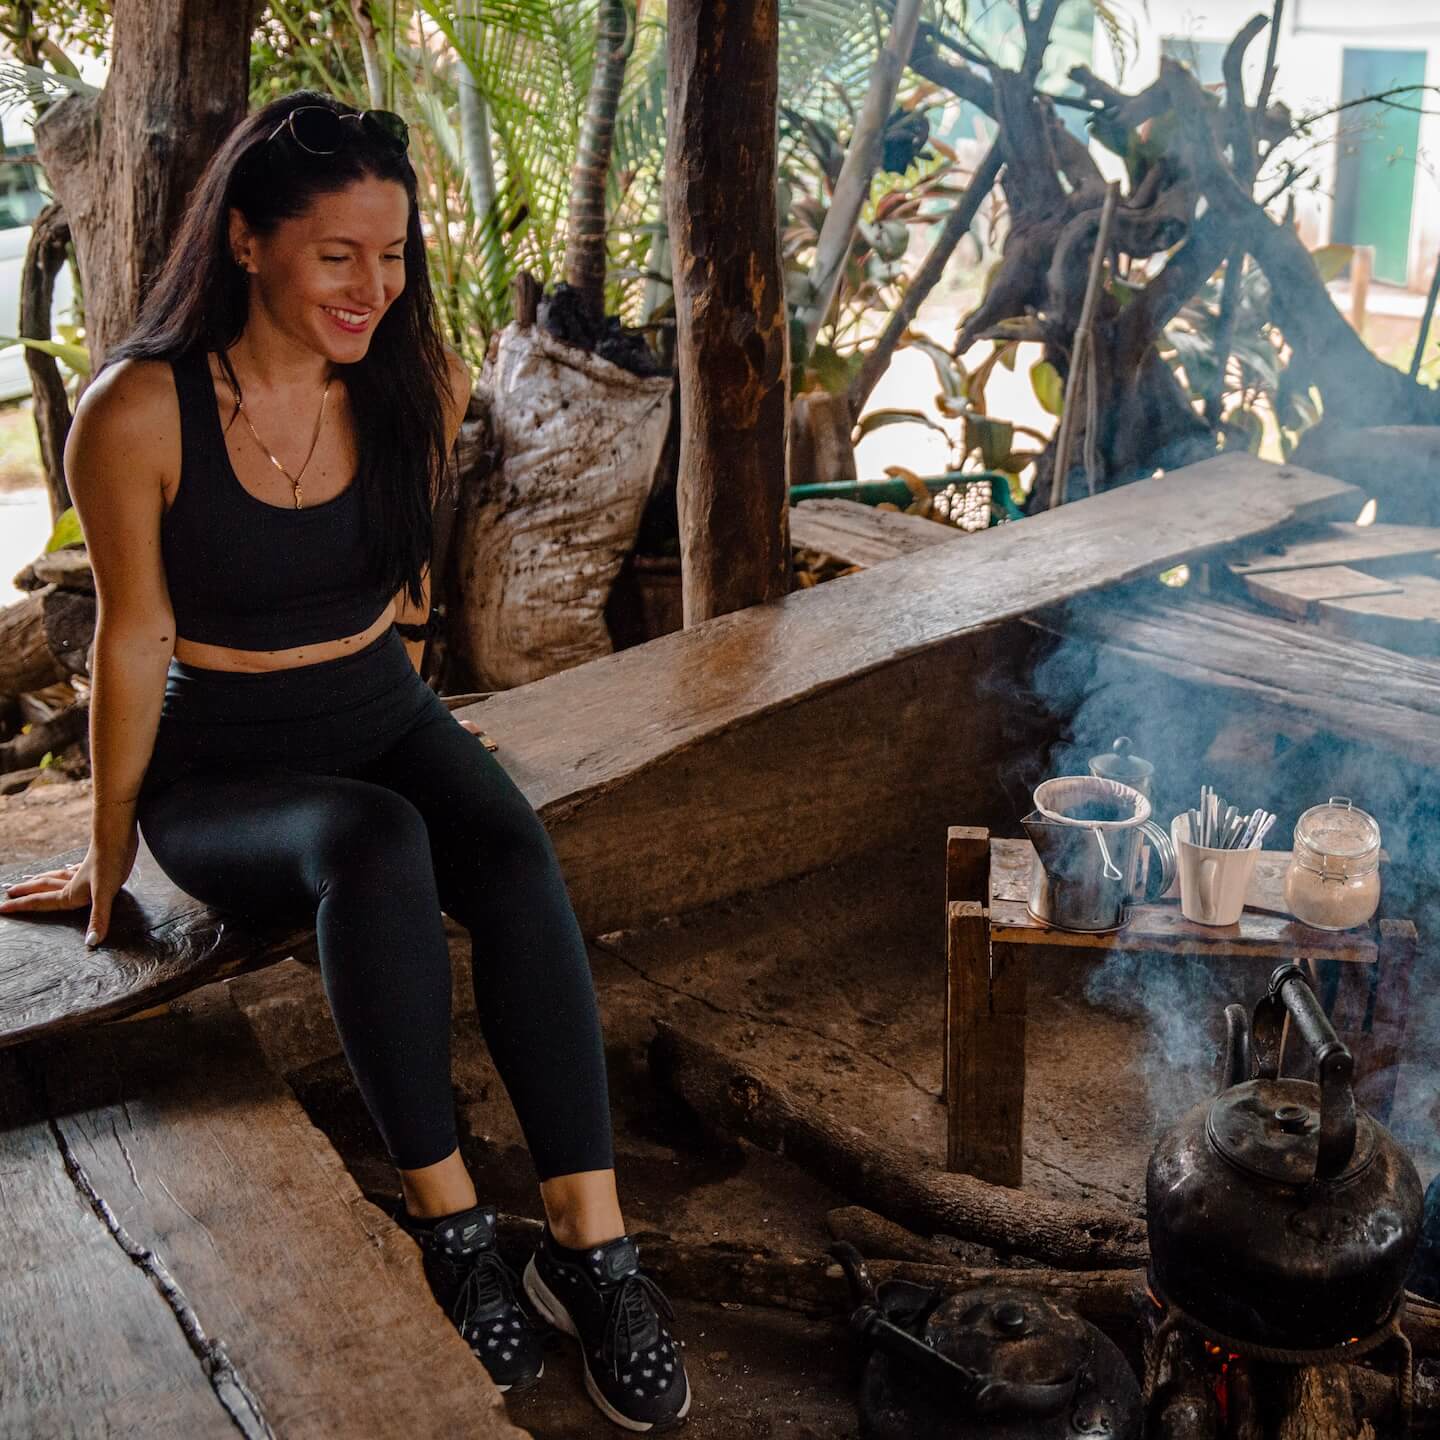 Stella making traditional coffee at Doi Inthanon National Park